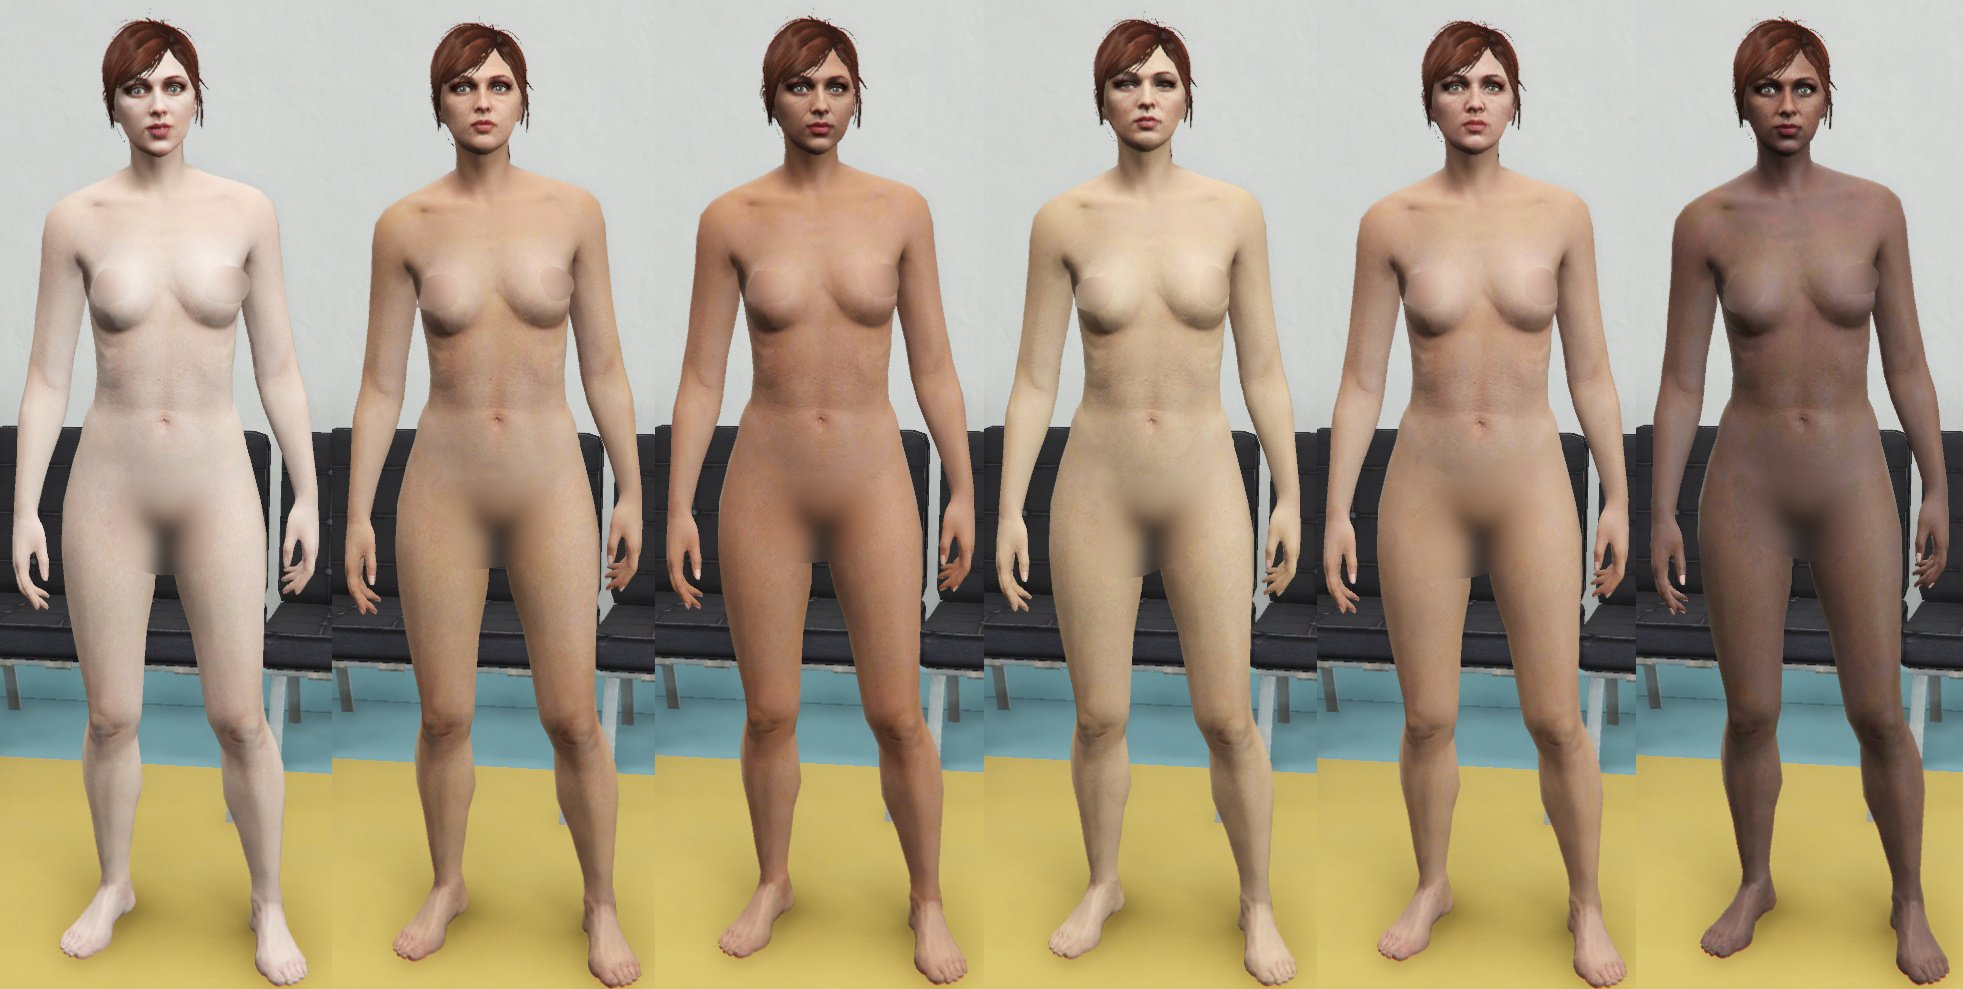 abegaile brandes add sims 4 nude textures photo